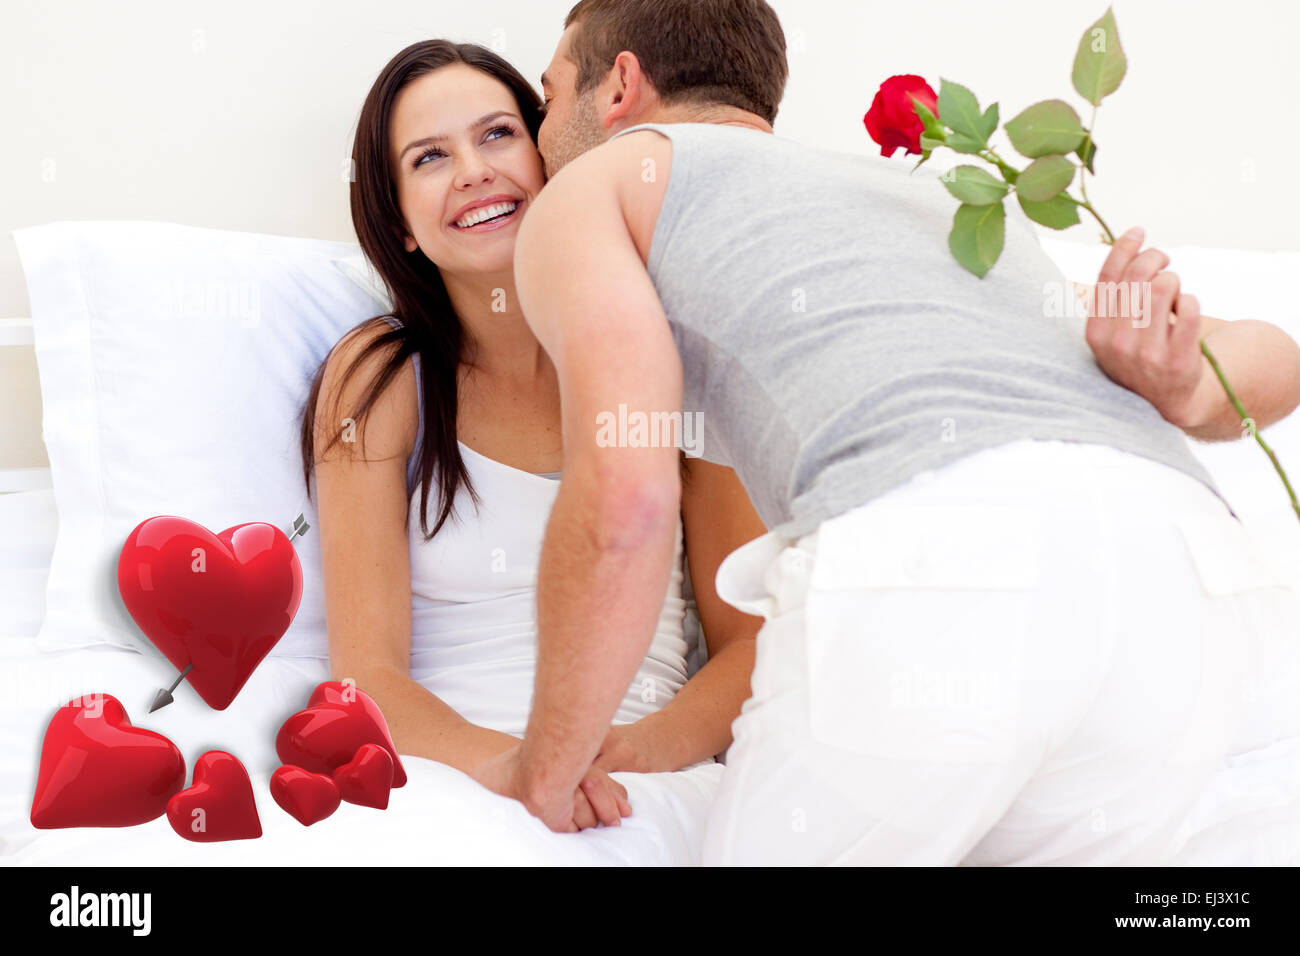 Composite image of husband giving a rose and a kiss to his ...